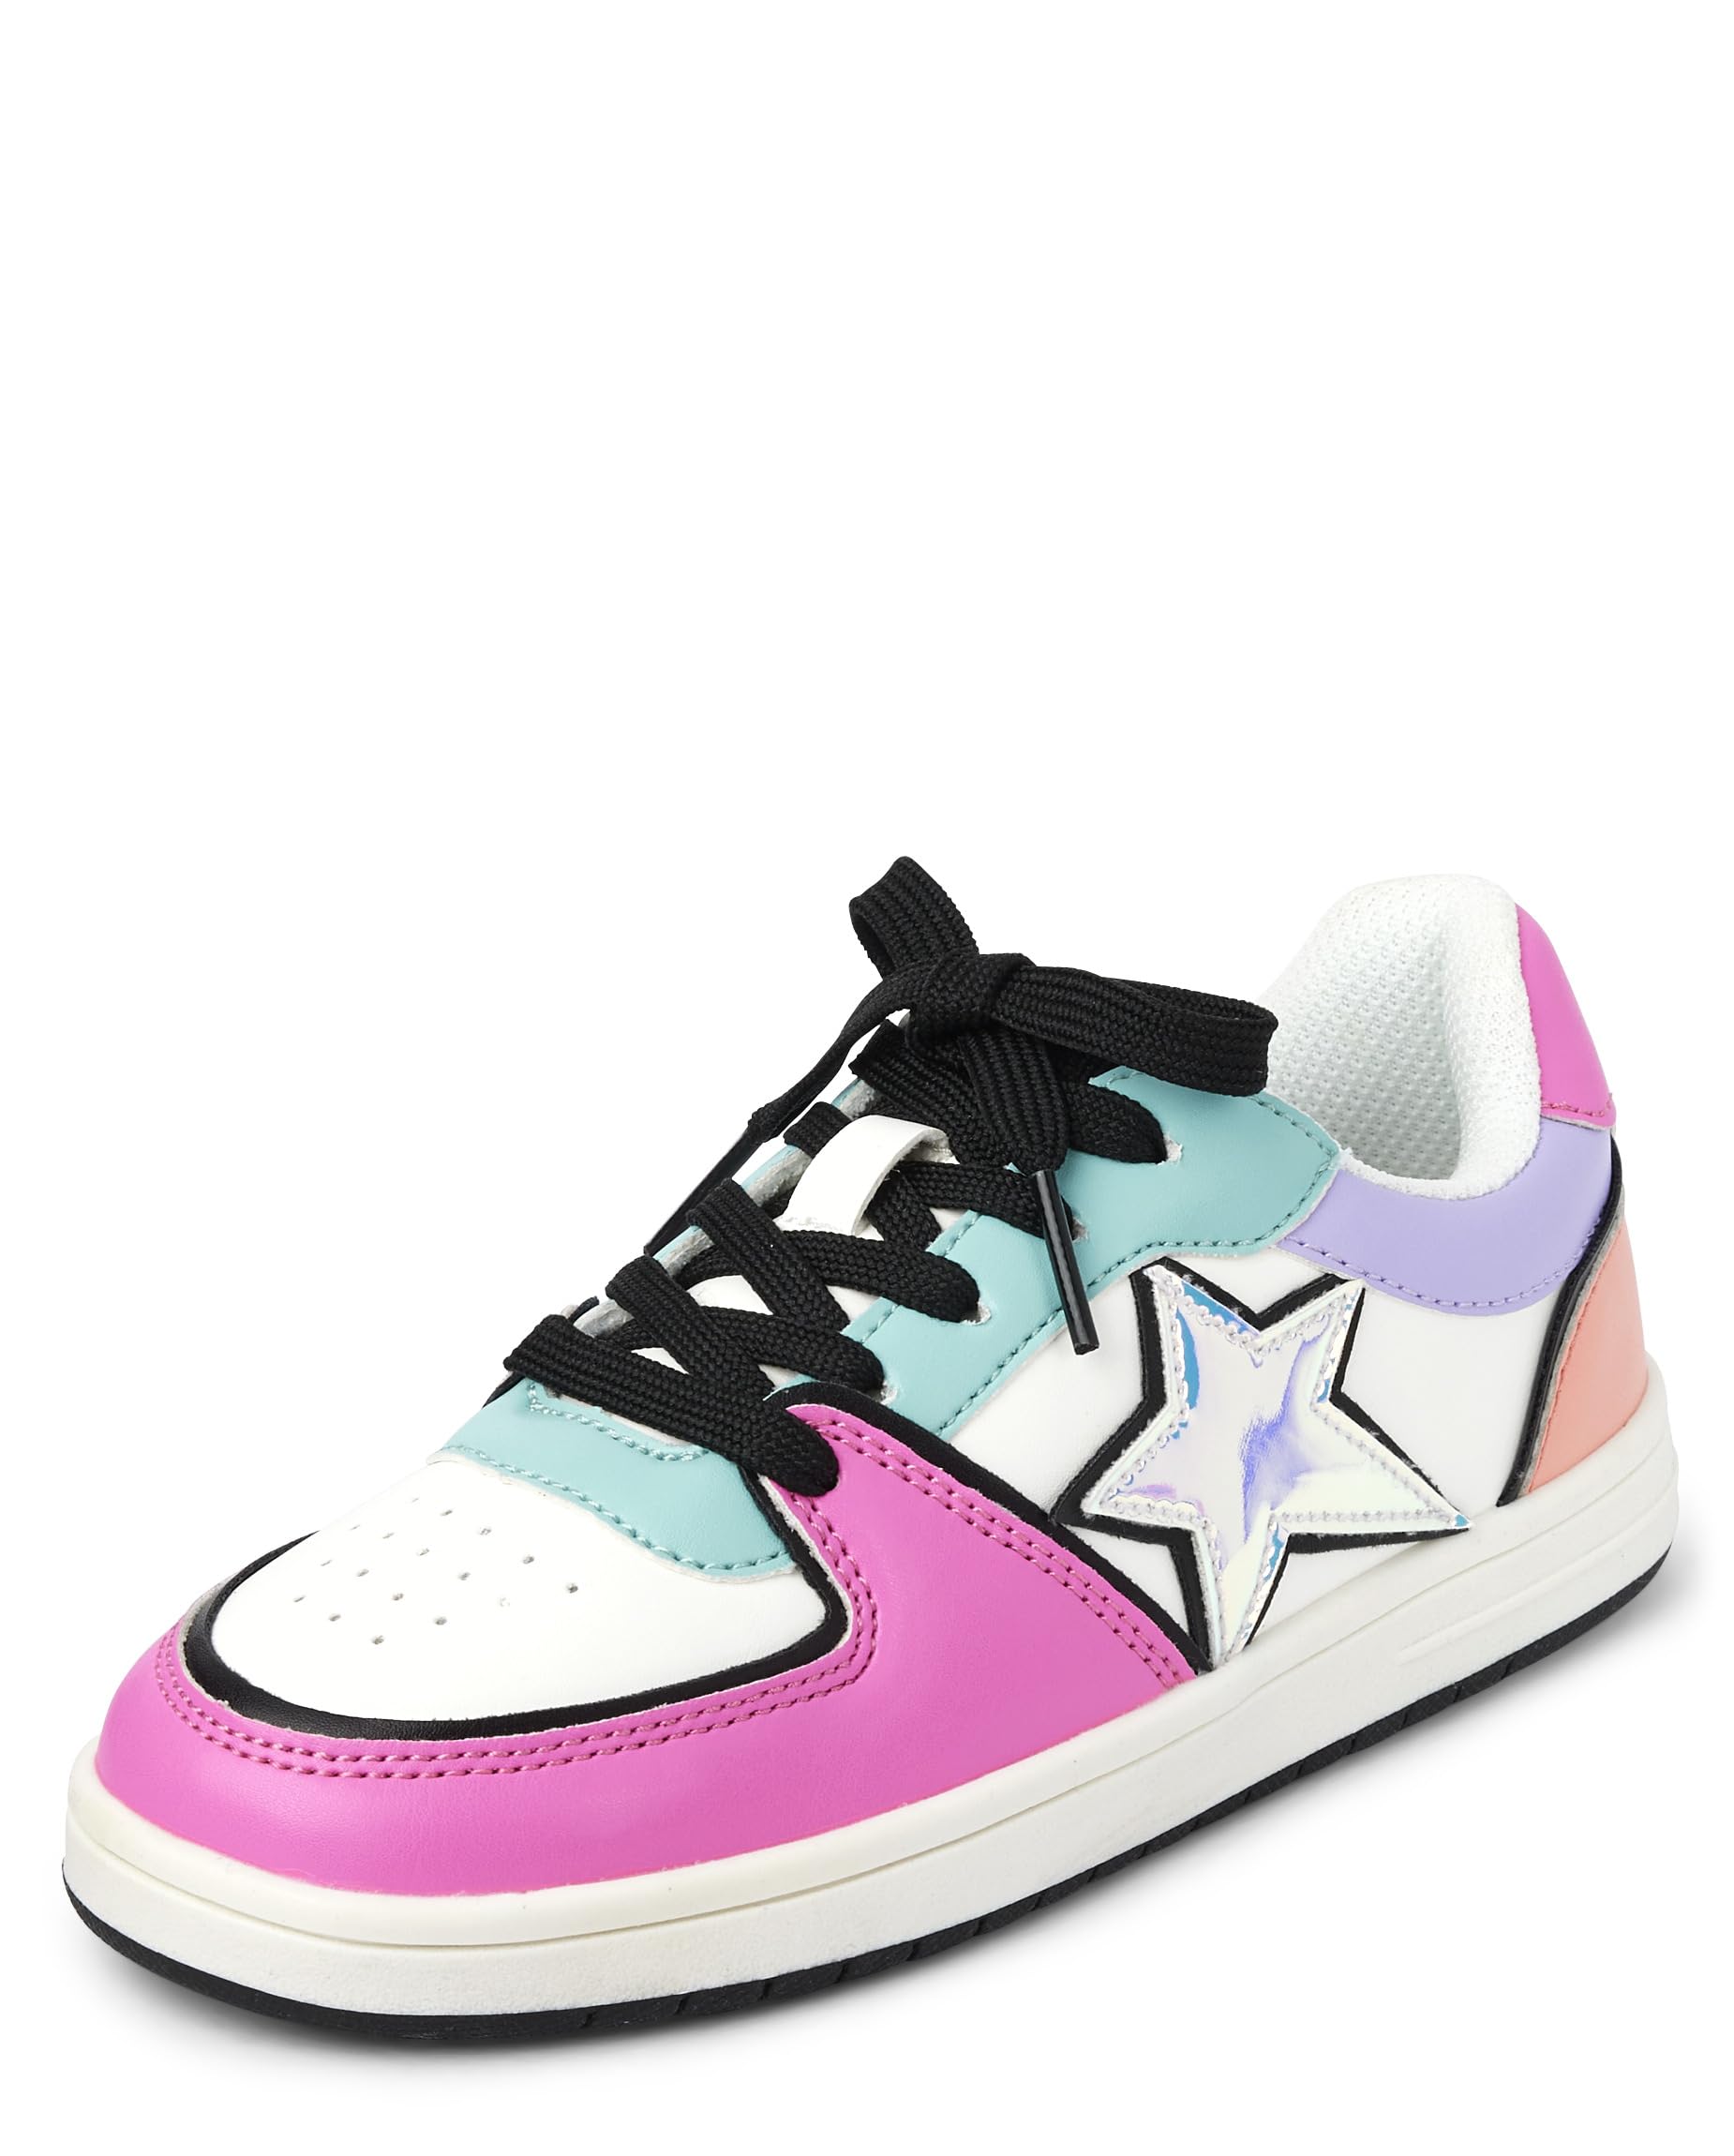 The Children's Place Girl's Casual Lace Up Low Top Sneakers